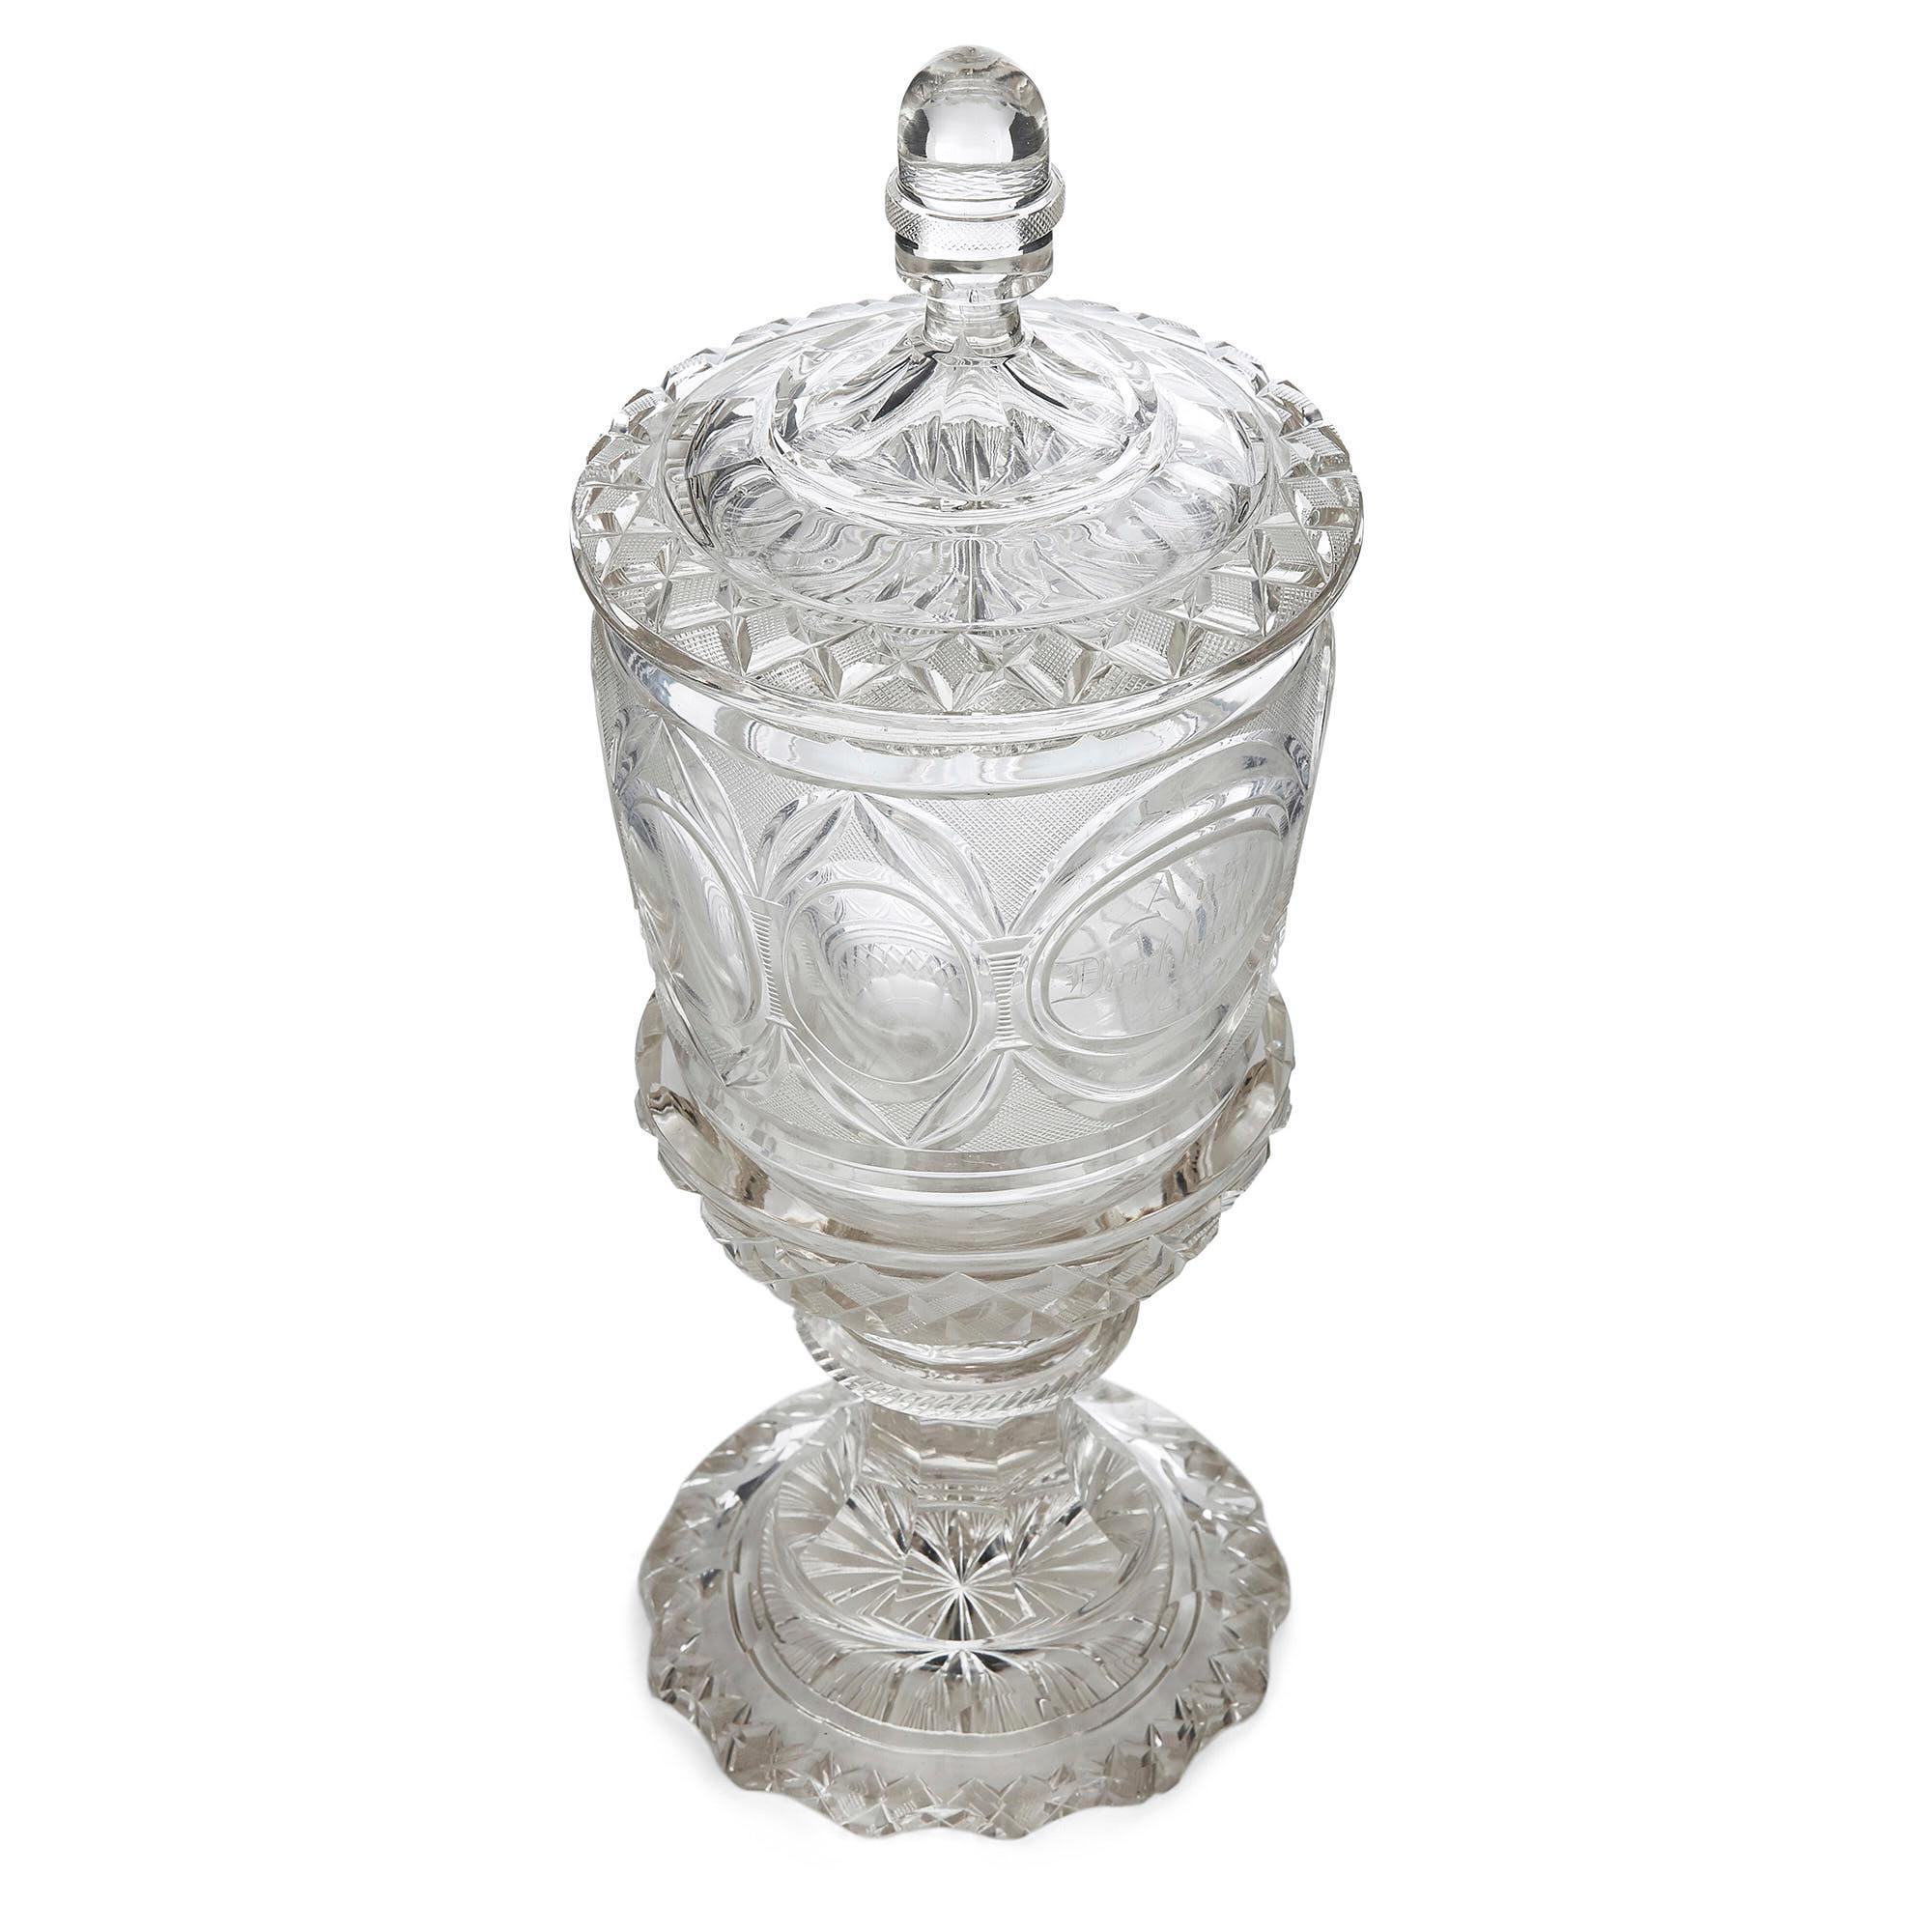 Antique 19th century cut and engraved Bohemian glass goblet
Bohemian, 1833
Dimensions: Height 34cm, diameter 13cm

Crafted from cut and engraved Bohemian glass, this goblet was originally given as a token of thanks and appreciation in 1833. This